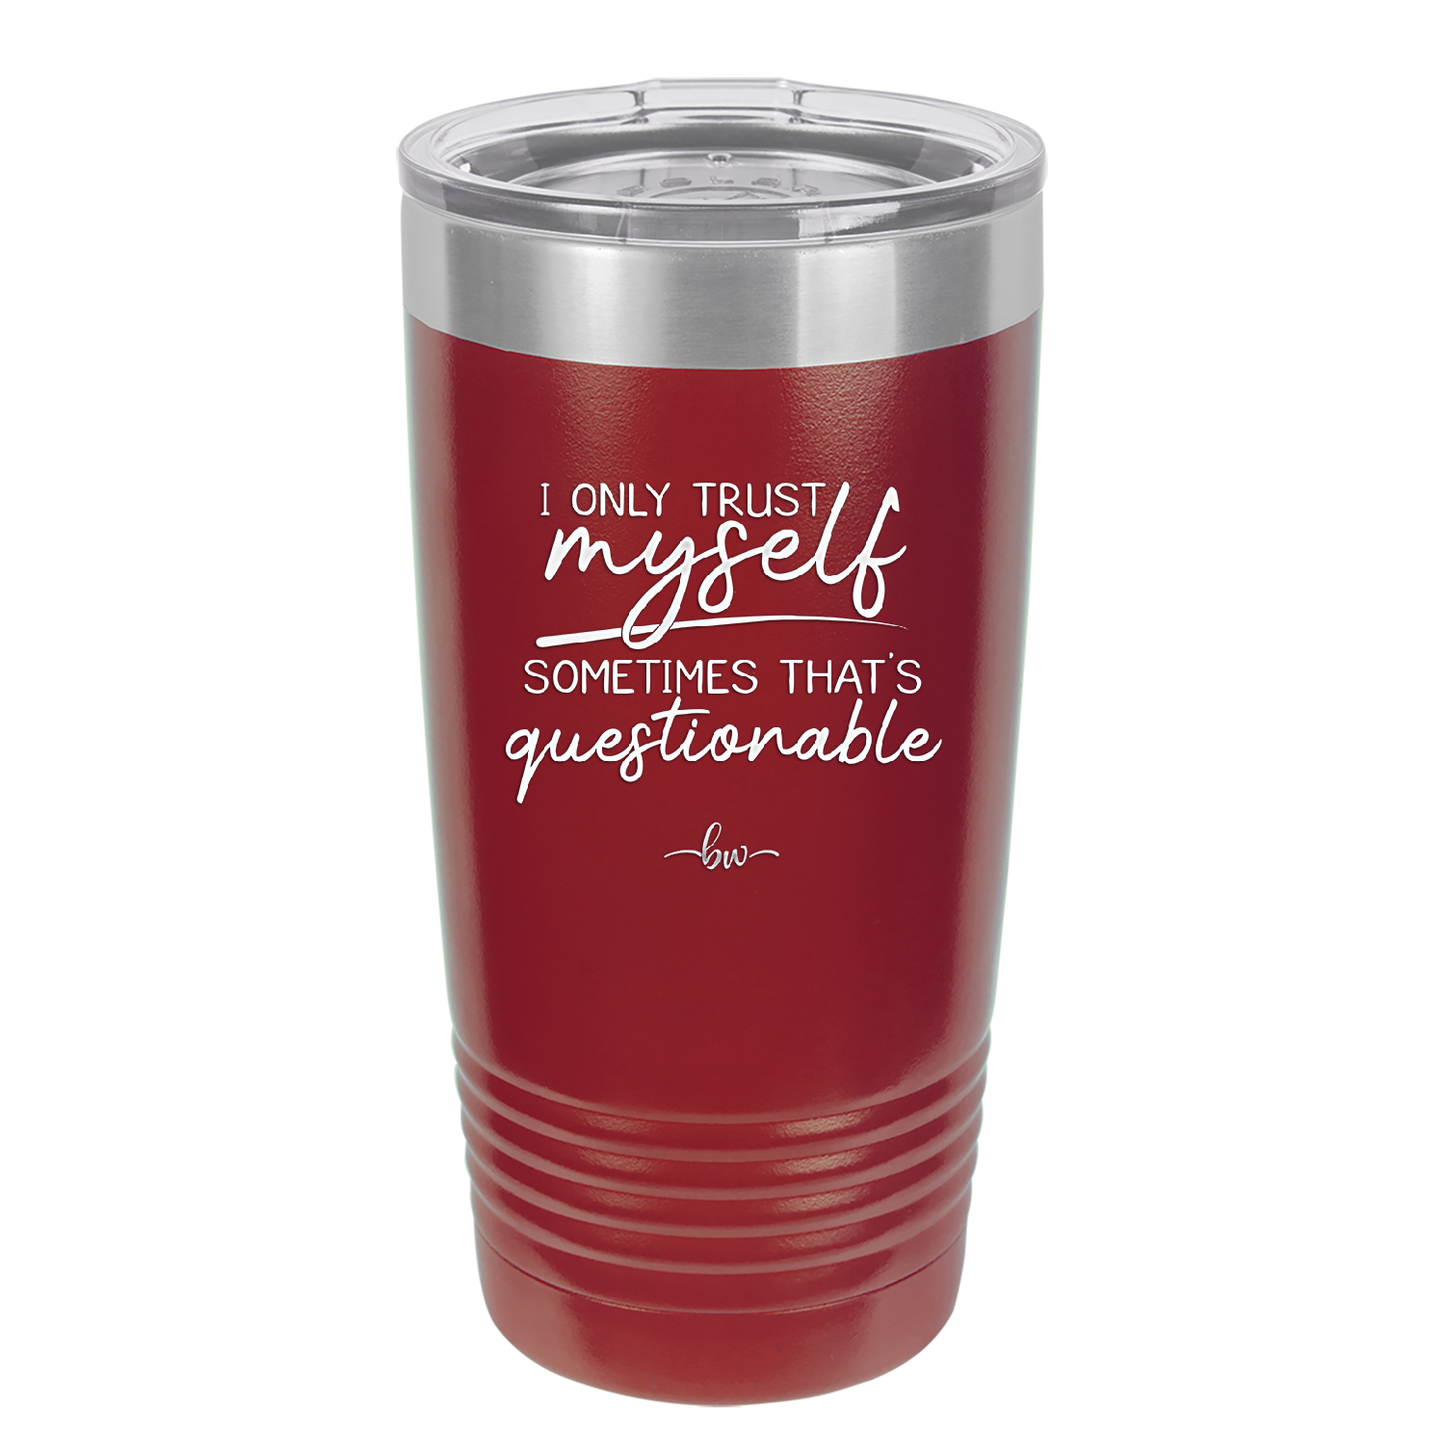 I Only Trust Myself Sometimes That's Questionable - Laser Engraved Stainless Steel Drinkware - 2417 -